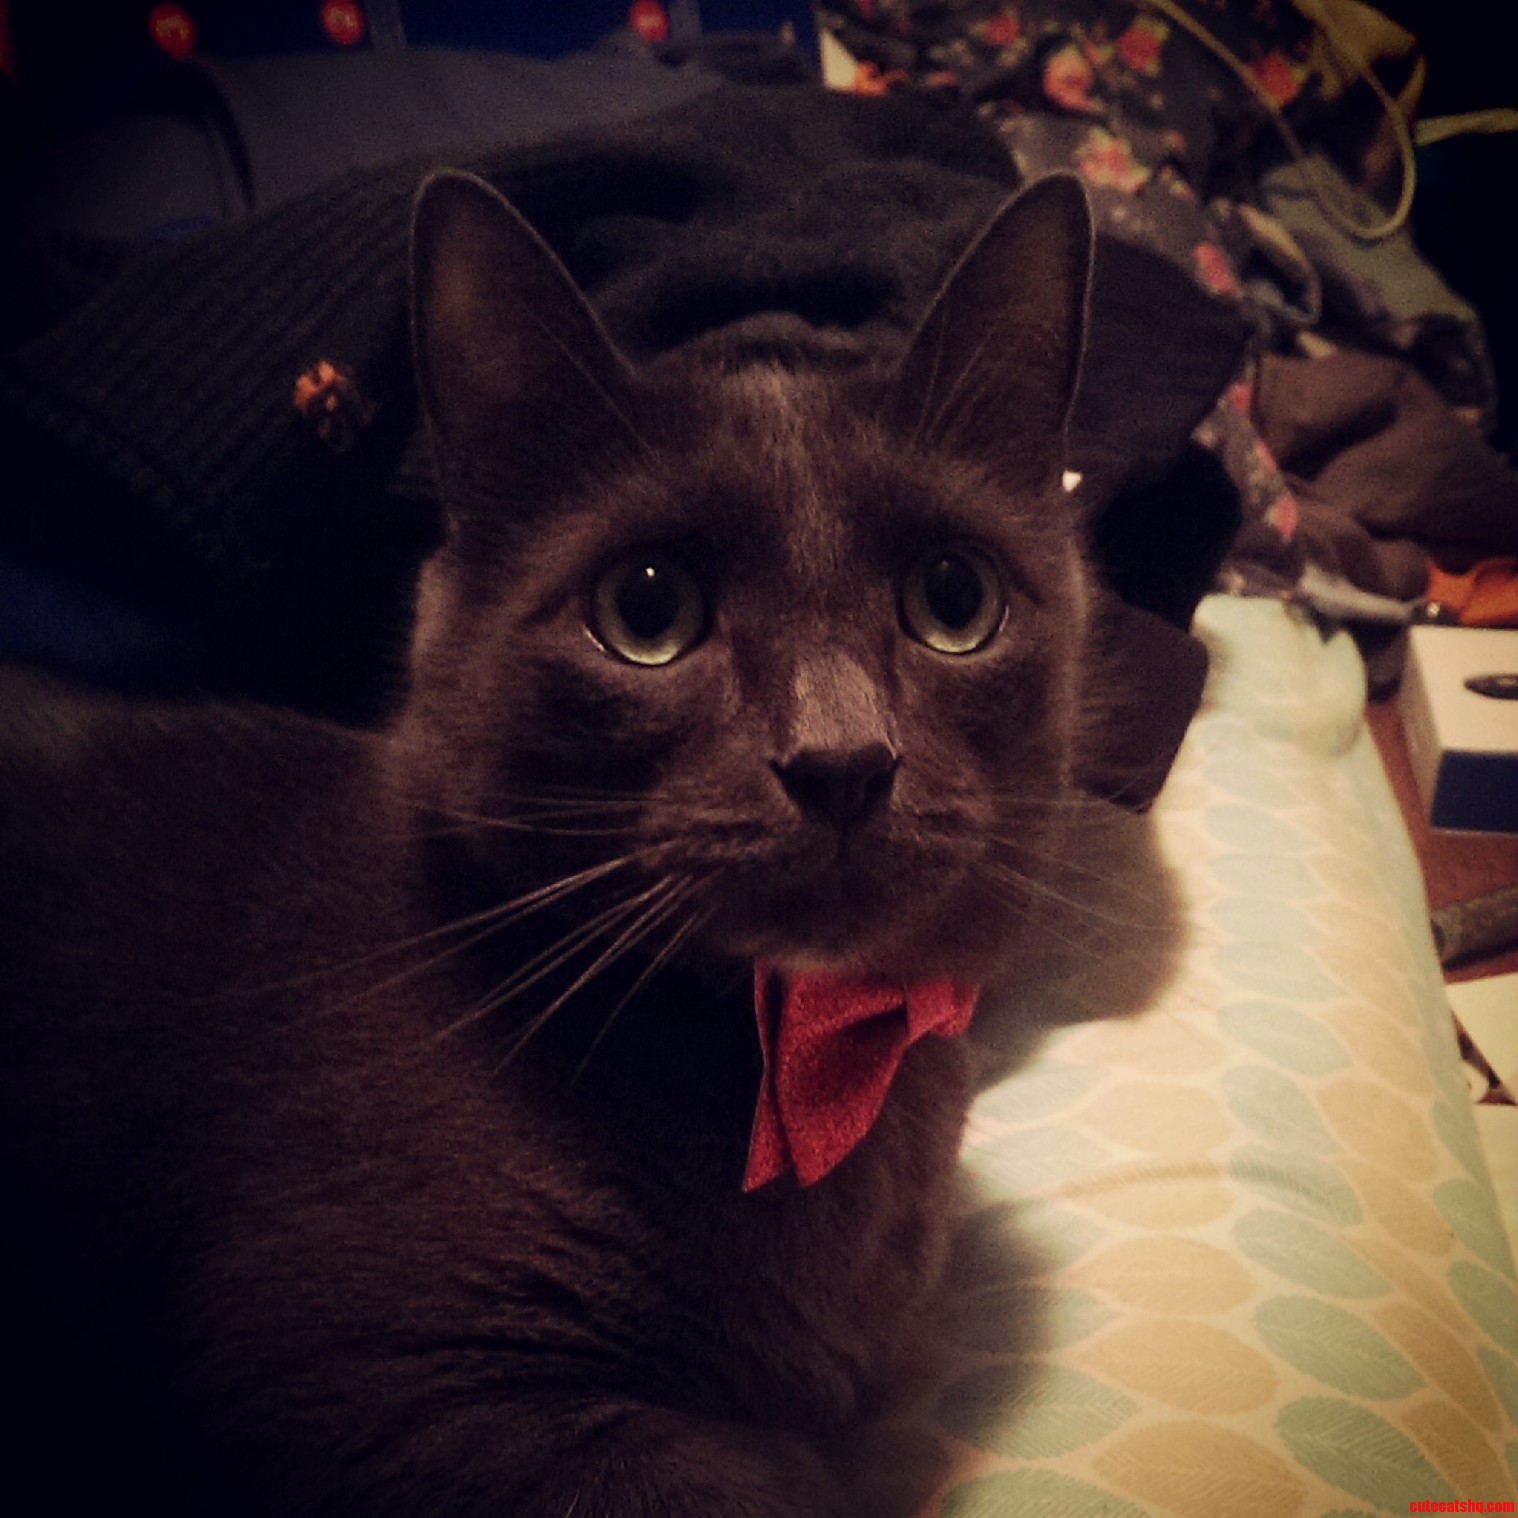 Found This Little Hair Tie.. Doubles As A Cat Bow Tie